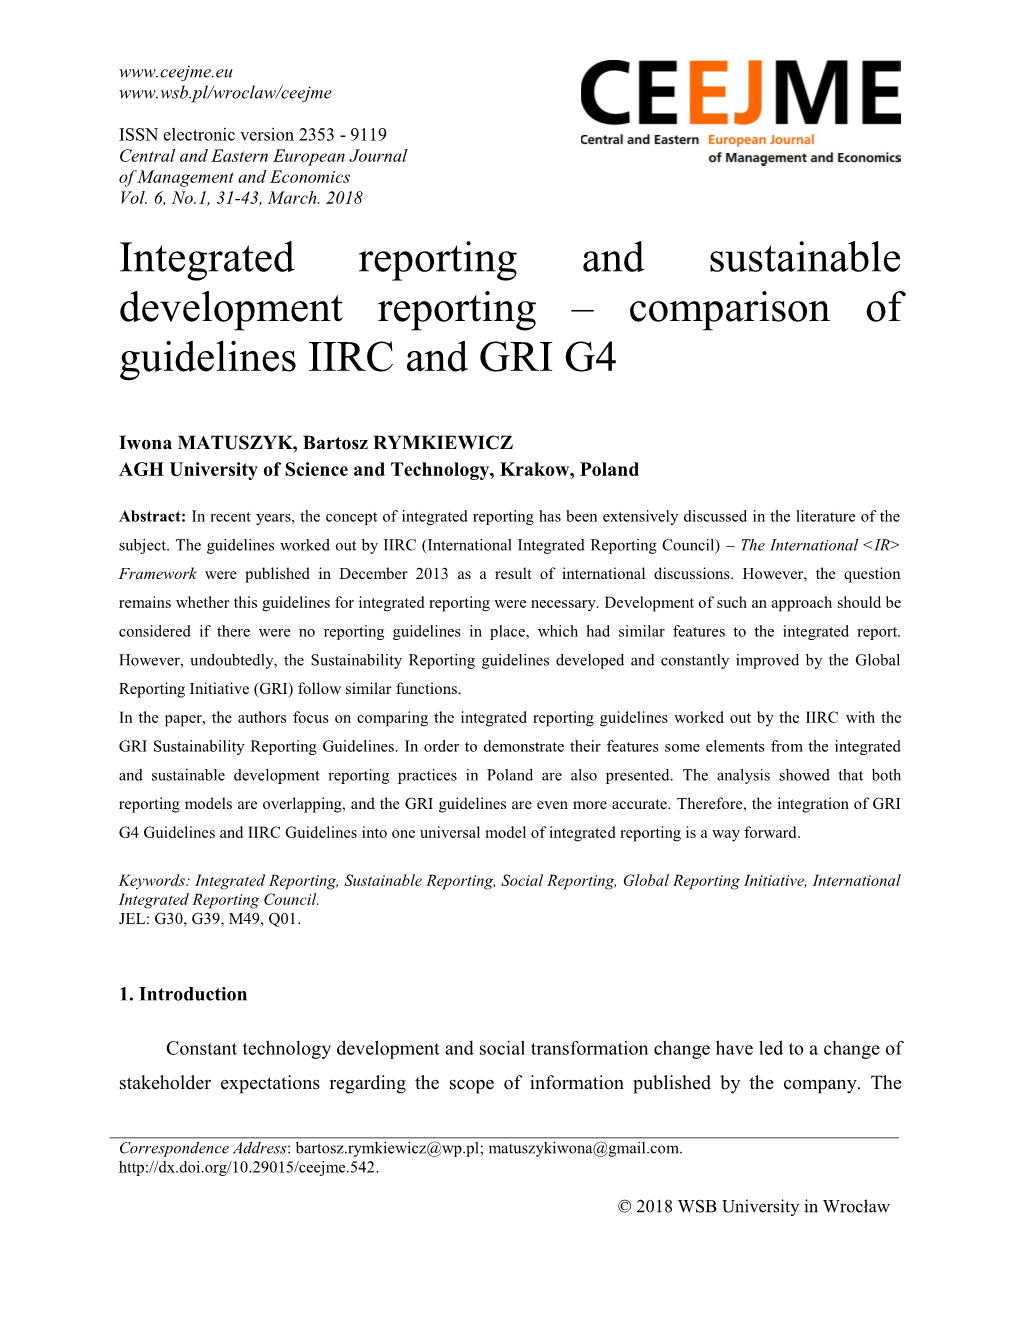 Integrated Reporting and Sustainable Development Reporting – Comparison of Guidelines IIRC and GRI G4